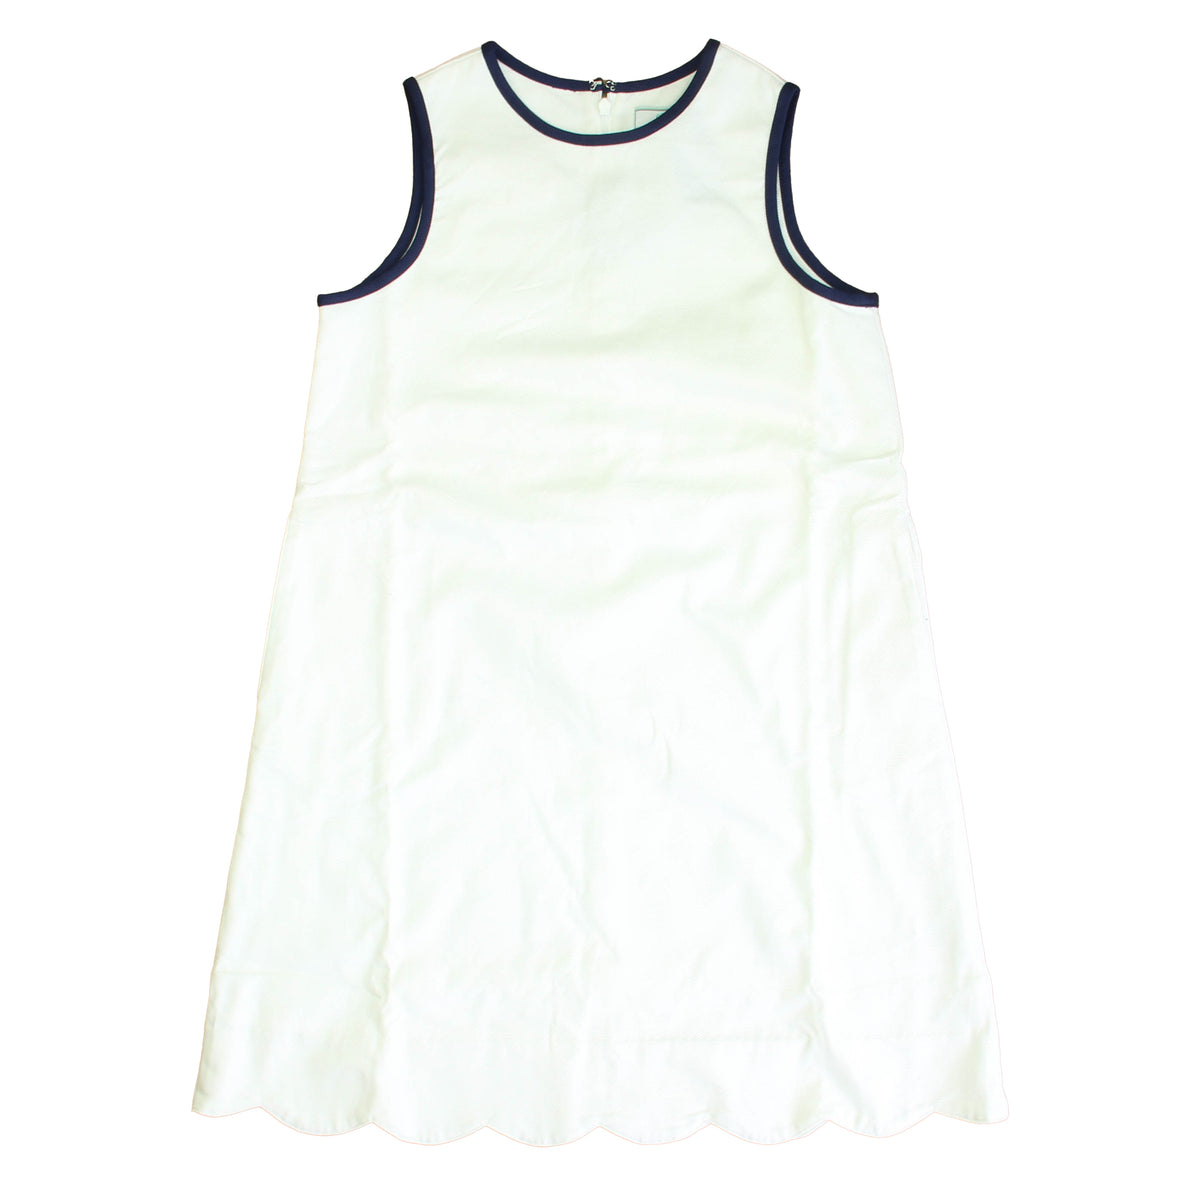 New with Tags: White | Navy Dress -- FINAL SALE